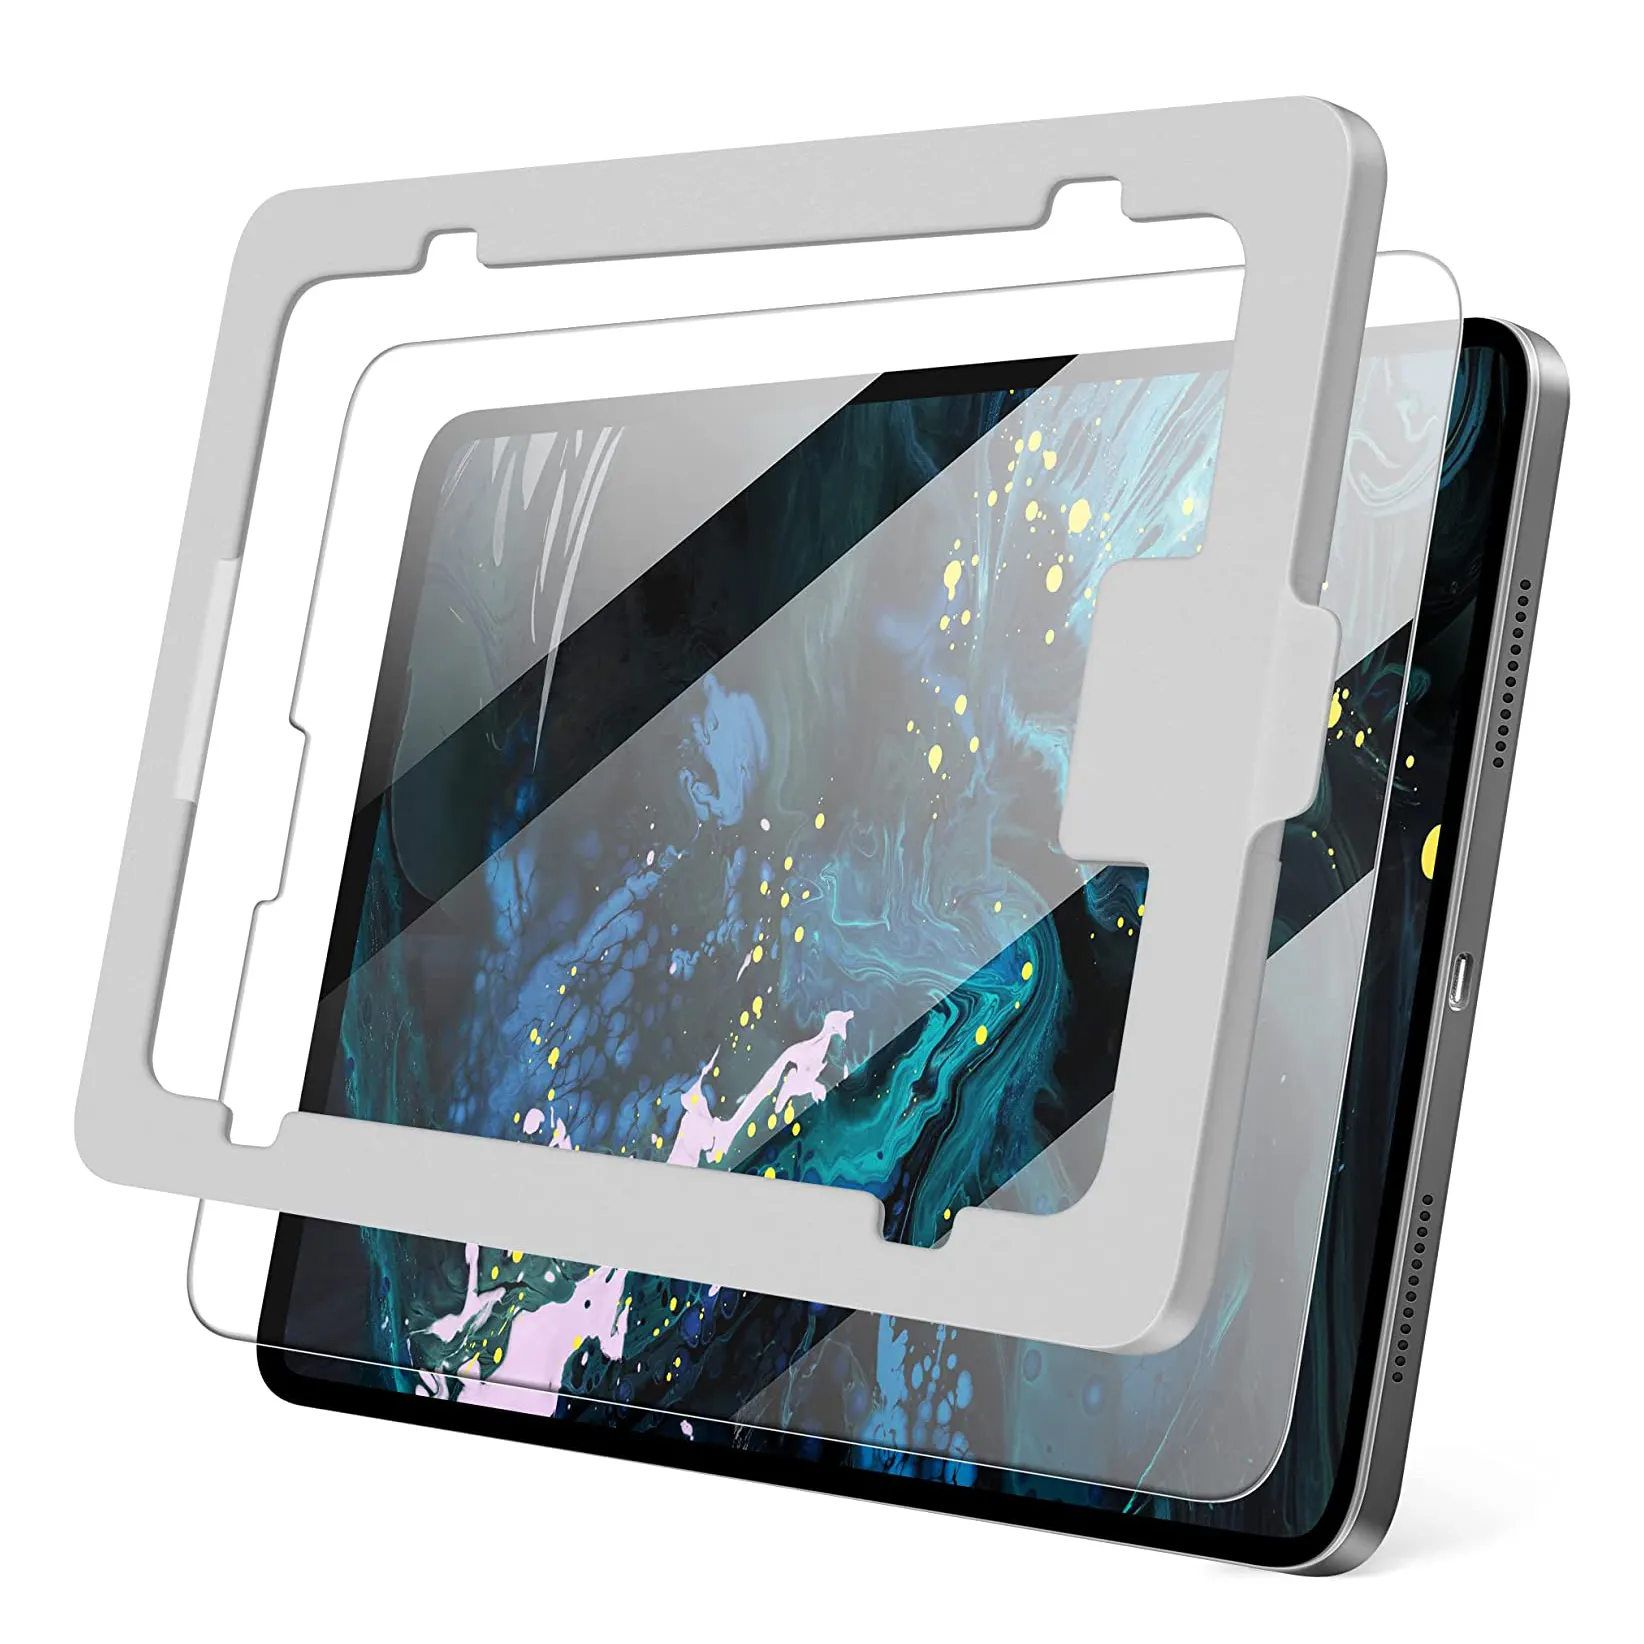 1-Touch Installation 2.5D HD Clear Anti Scratch Tempered Glass Screen Protector for iPad 2022 with Auto Alignment Kit